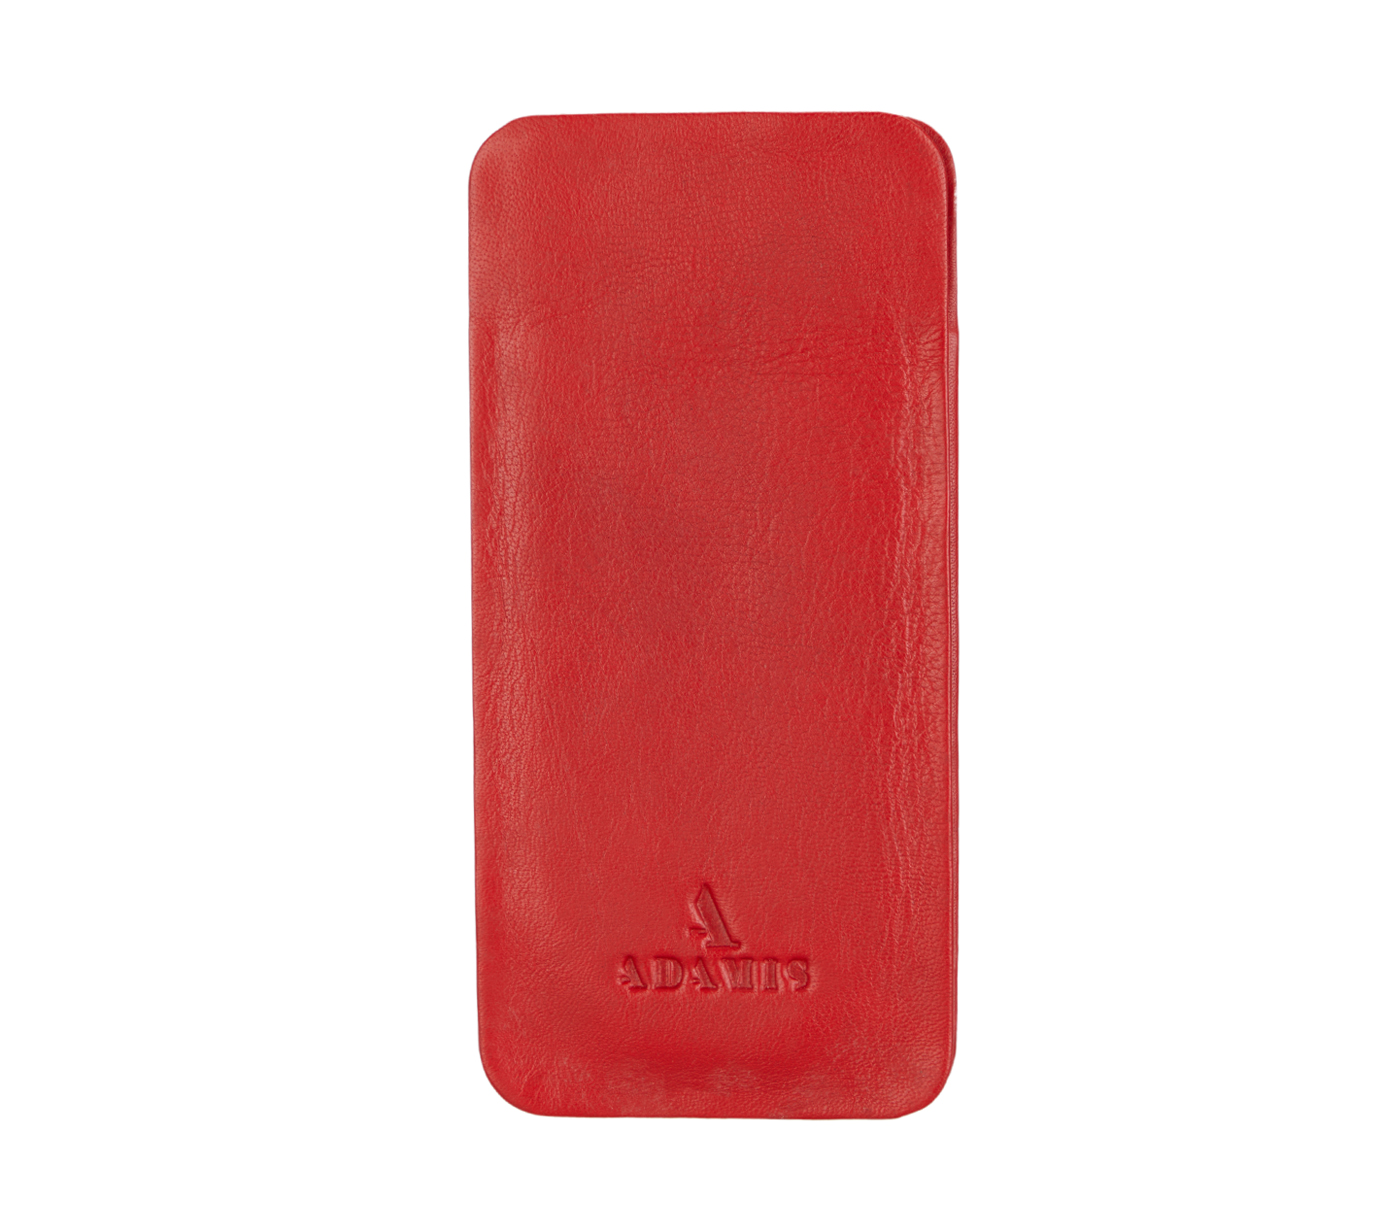 VW11--Soft stitch free spectacle case in Genuine Leather - Red